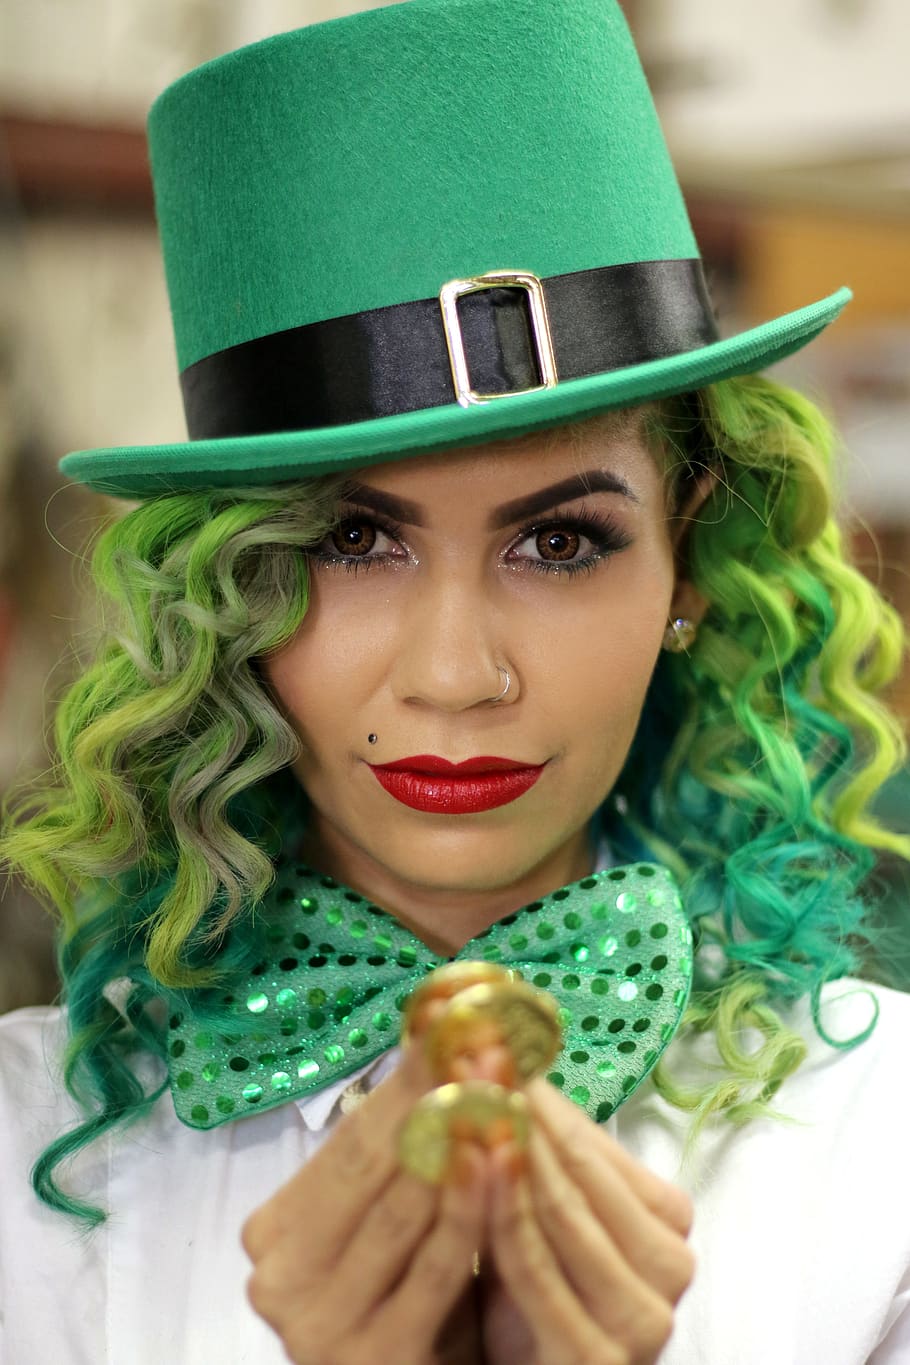 st patrick's day, saint patrick's day, holiday, green hair, green hat, gold coins, bow tie, fun, top hat, gold